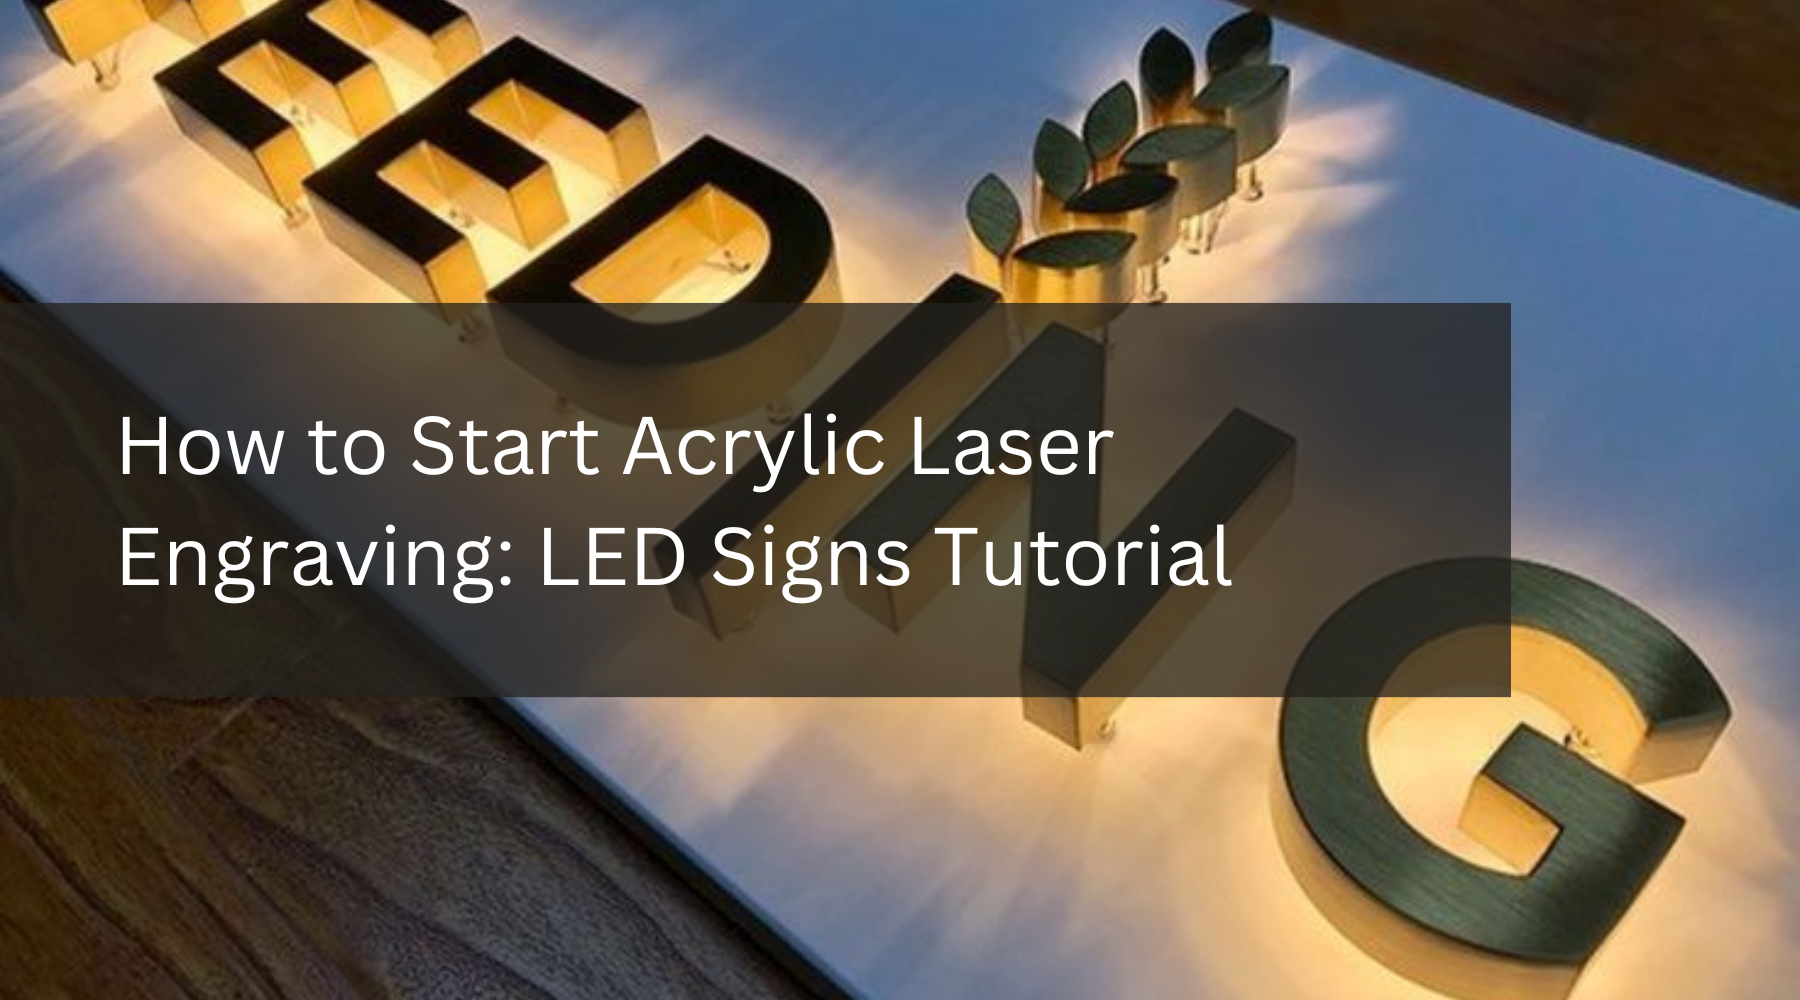 How to Start Acrylic Laser Engraving: LED Signs Tutorial